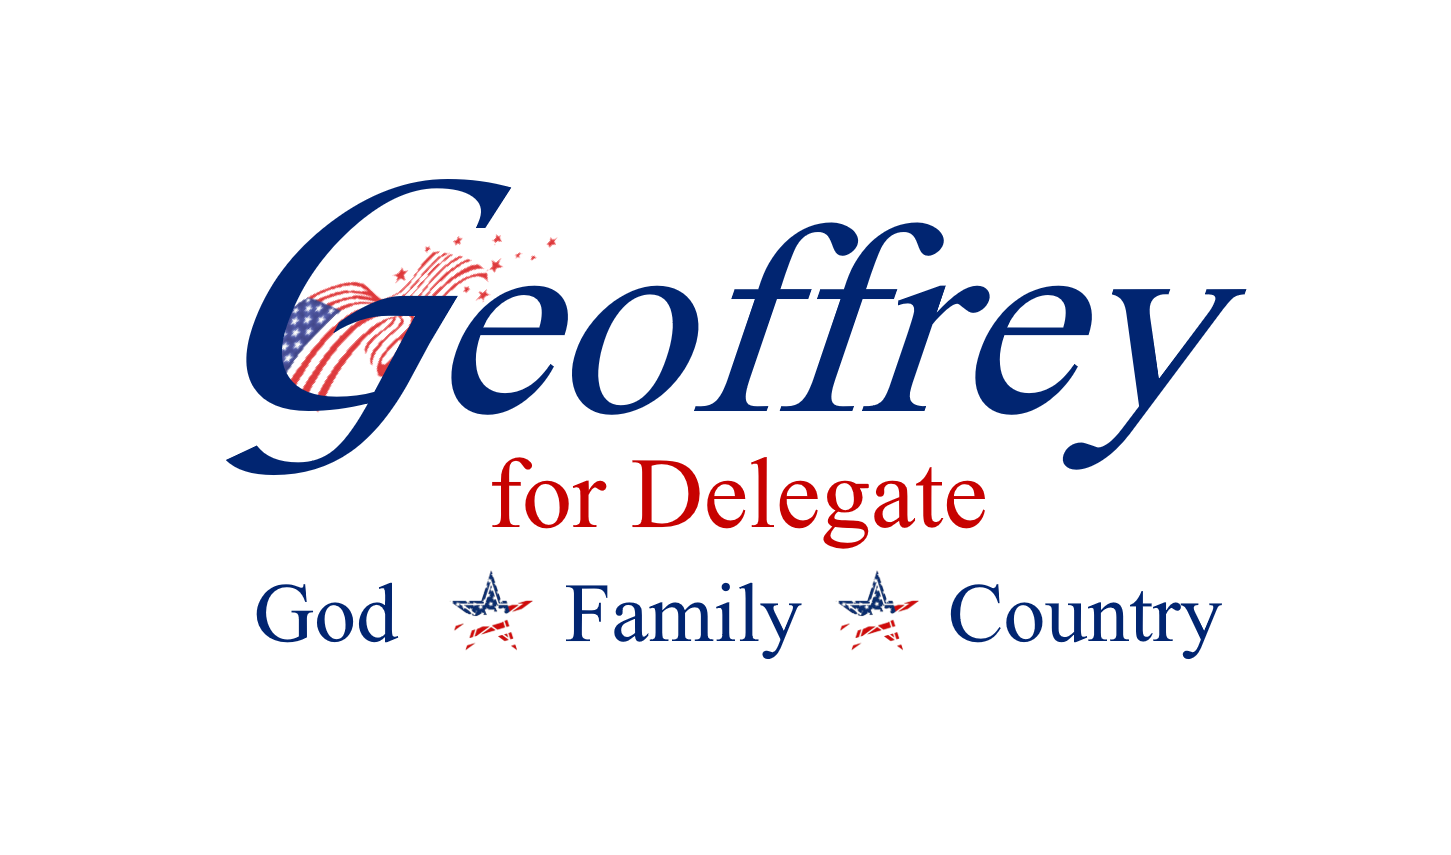 Geoffrey burke for virgnia house of delegates 77th district